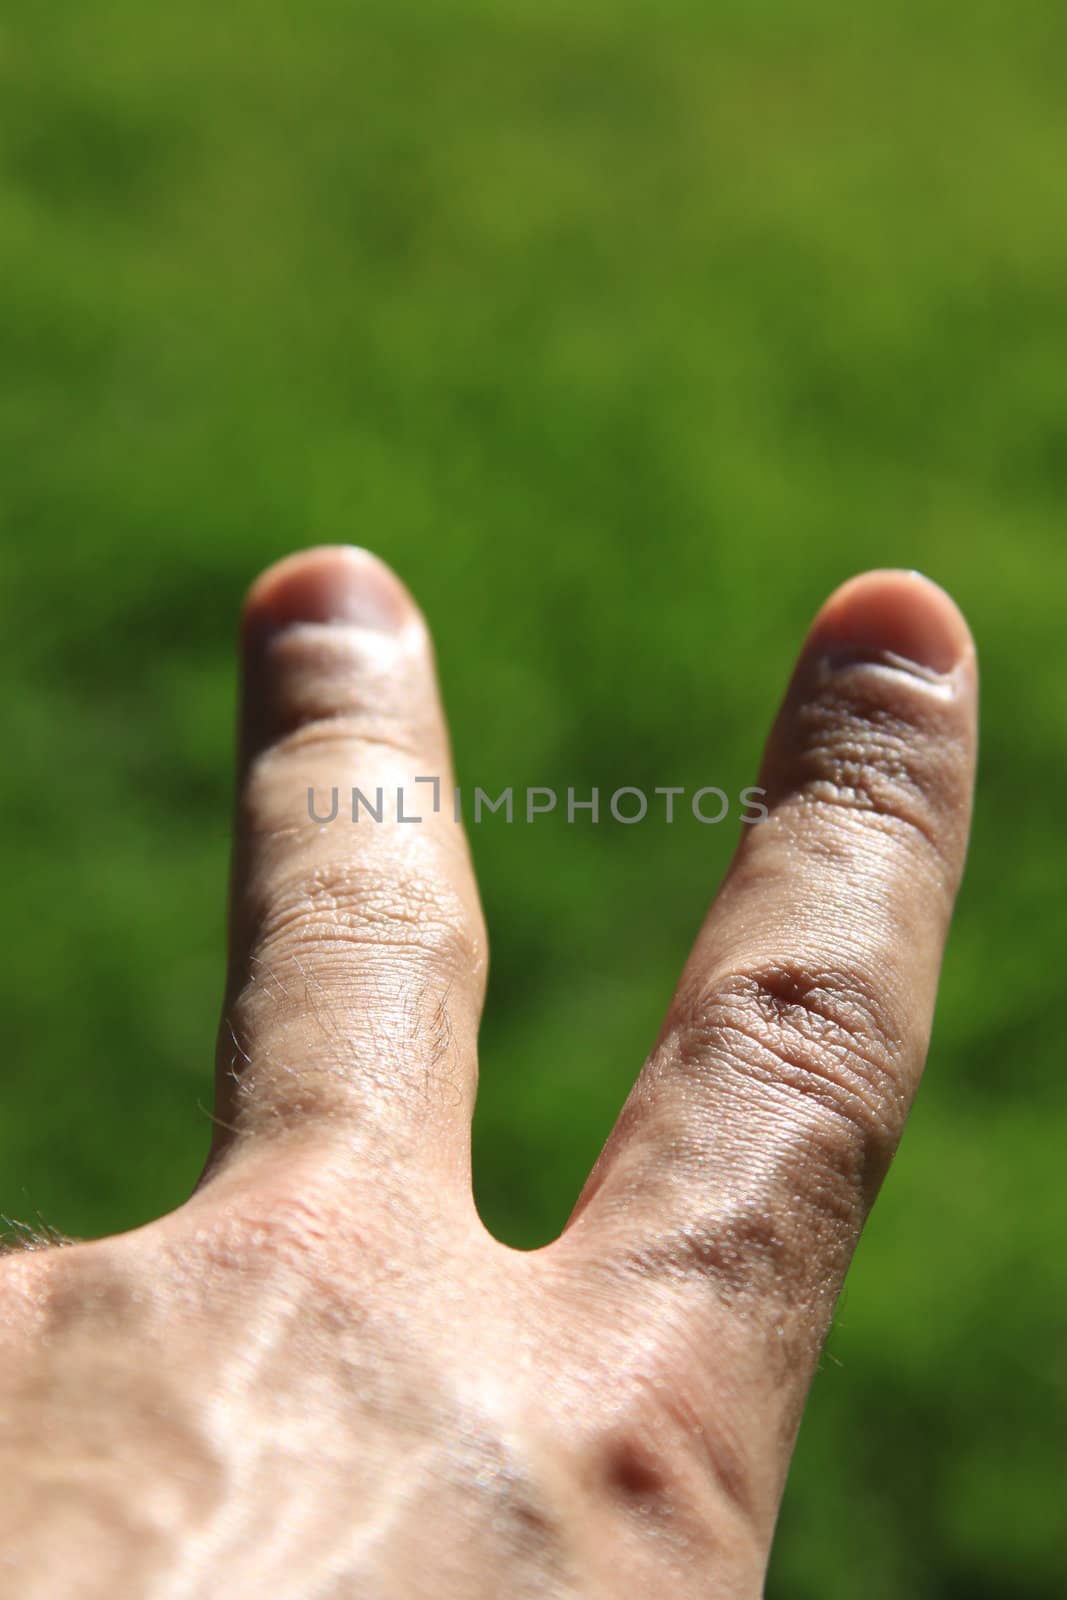 Man's hand showing peace sign.